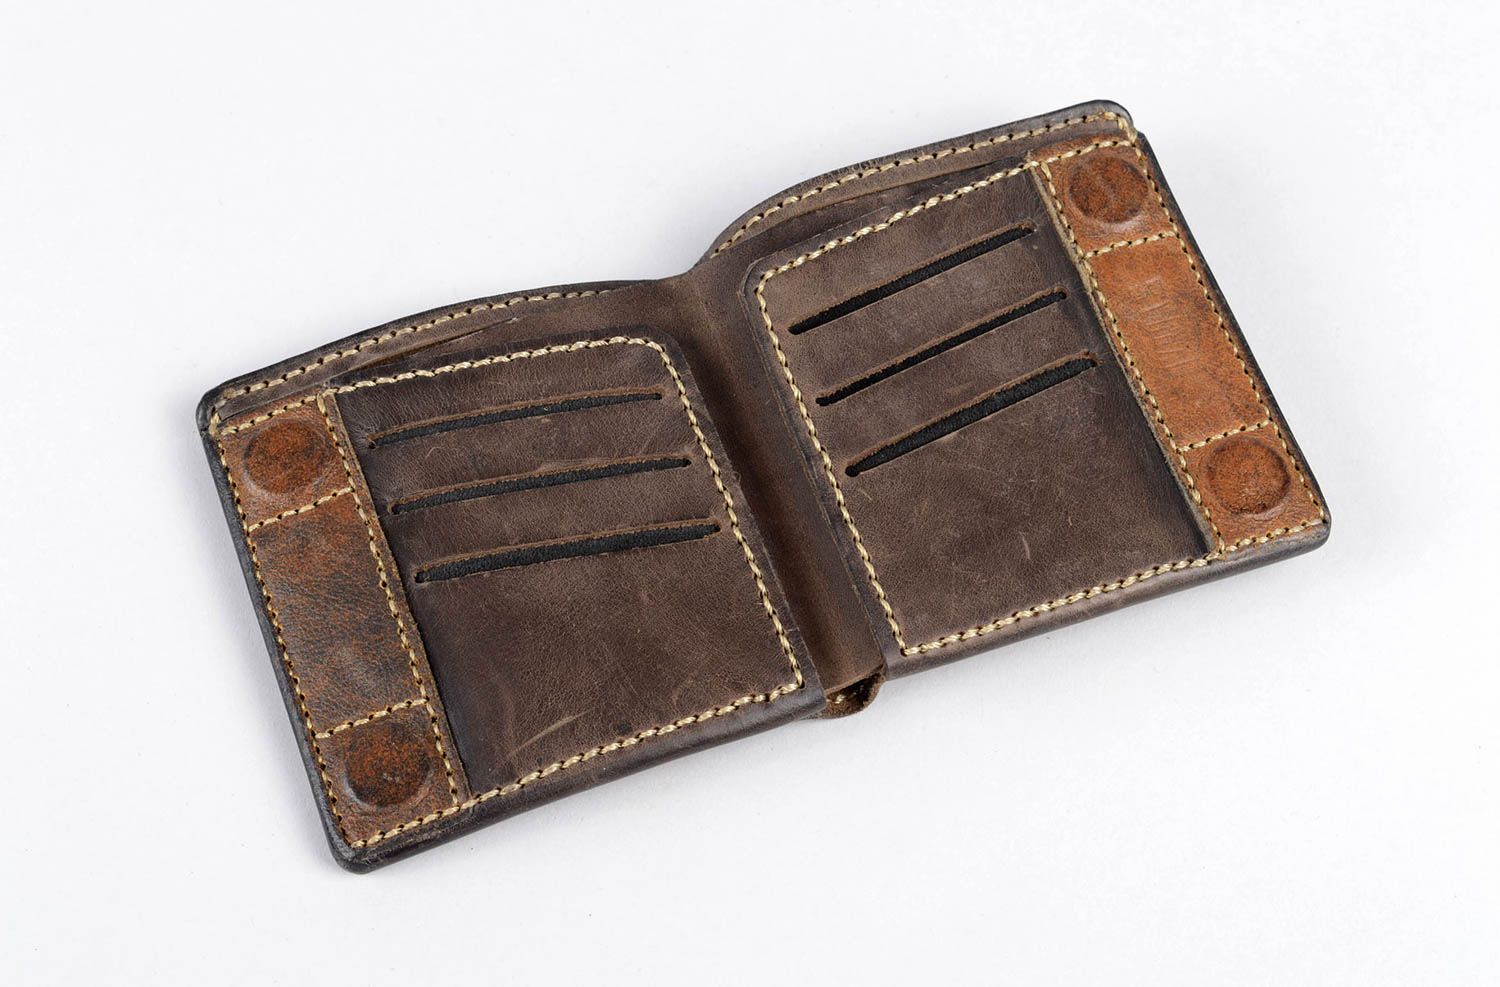 Handmade wallet for men gift ideas unusual purse for men leather wallet photo 2